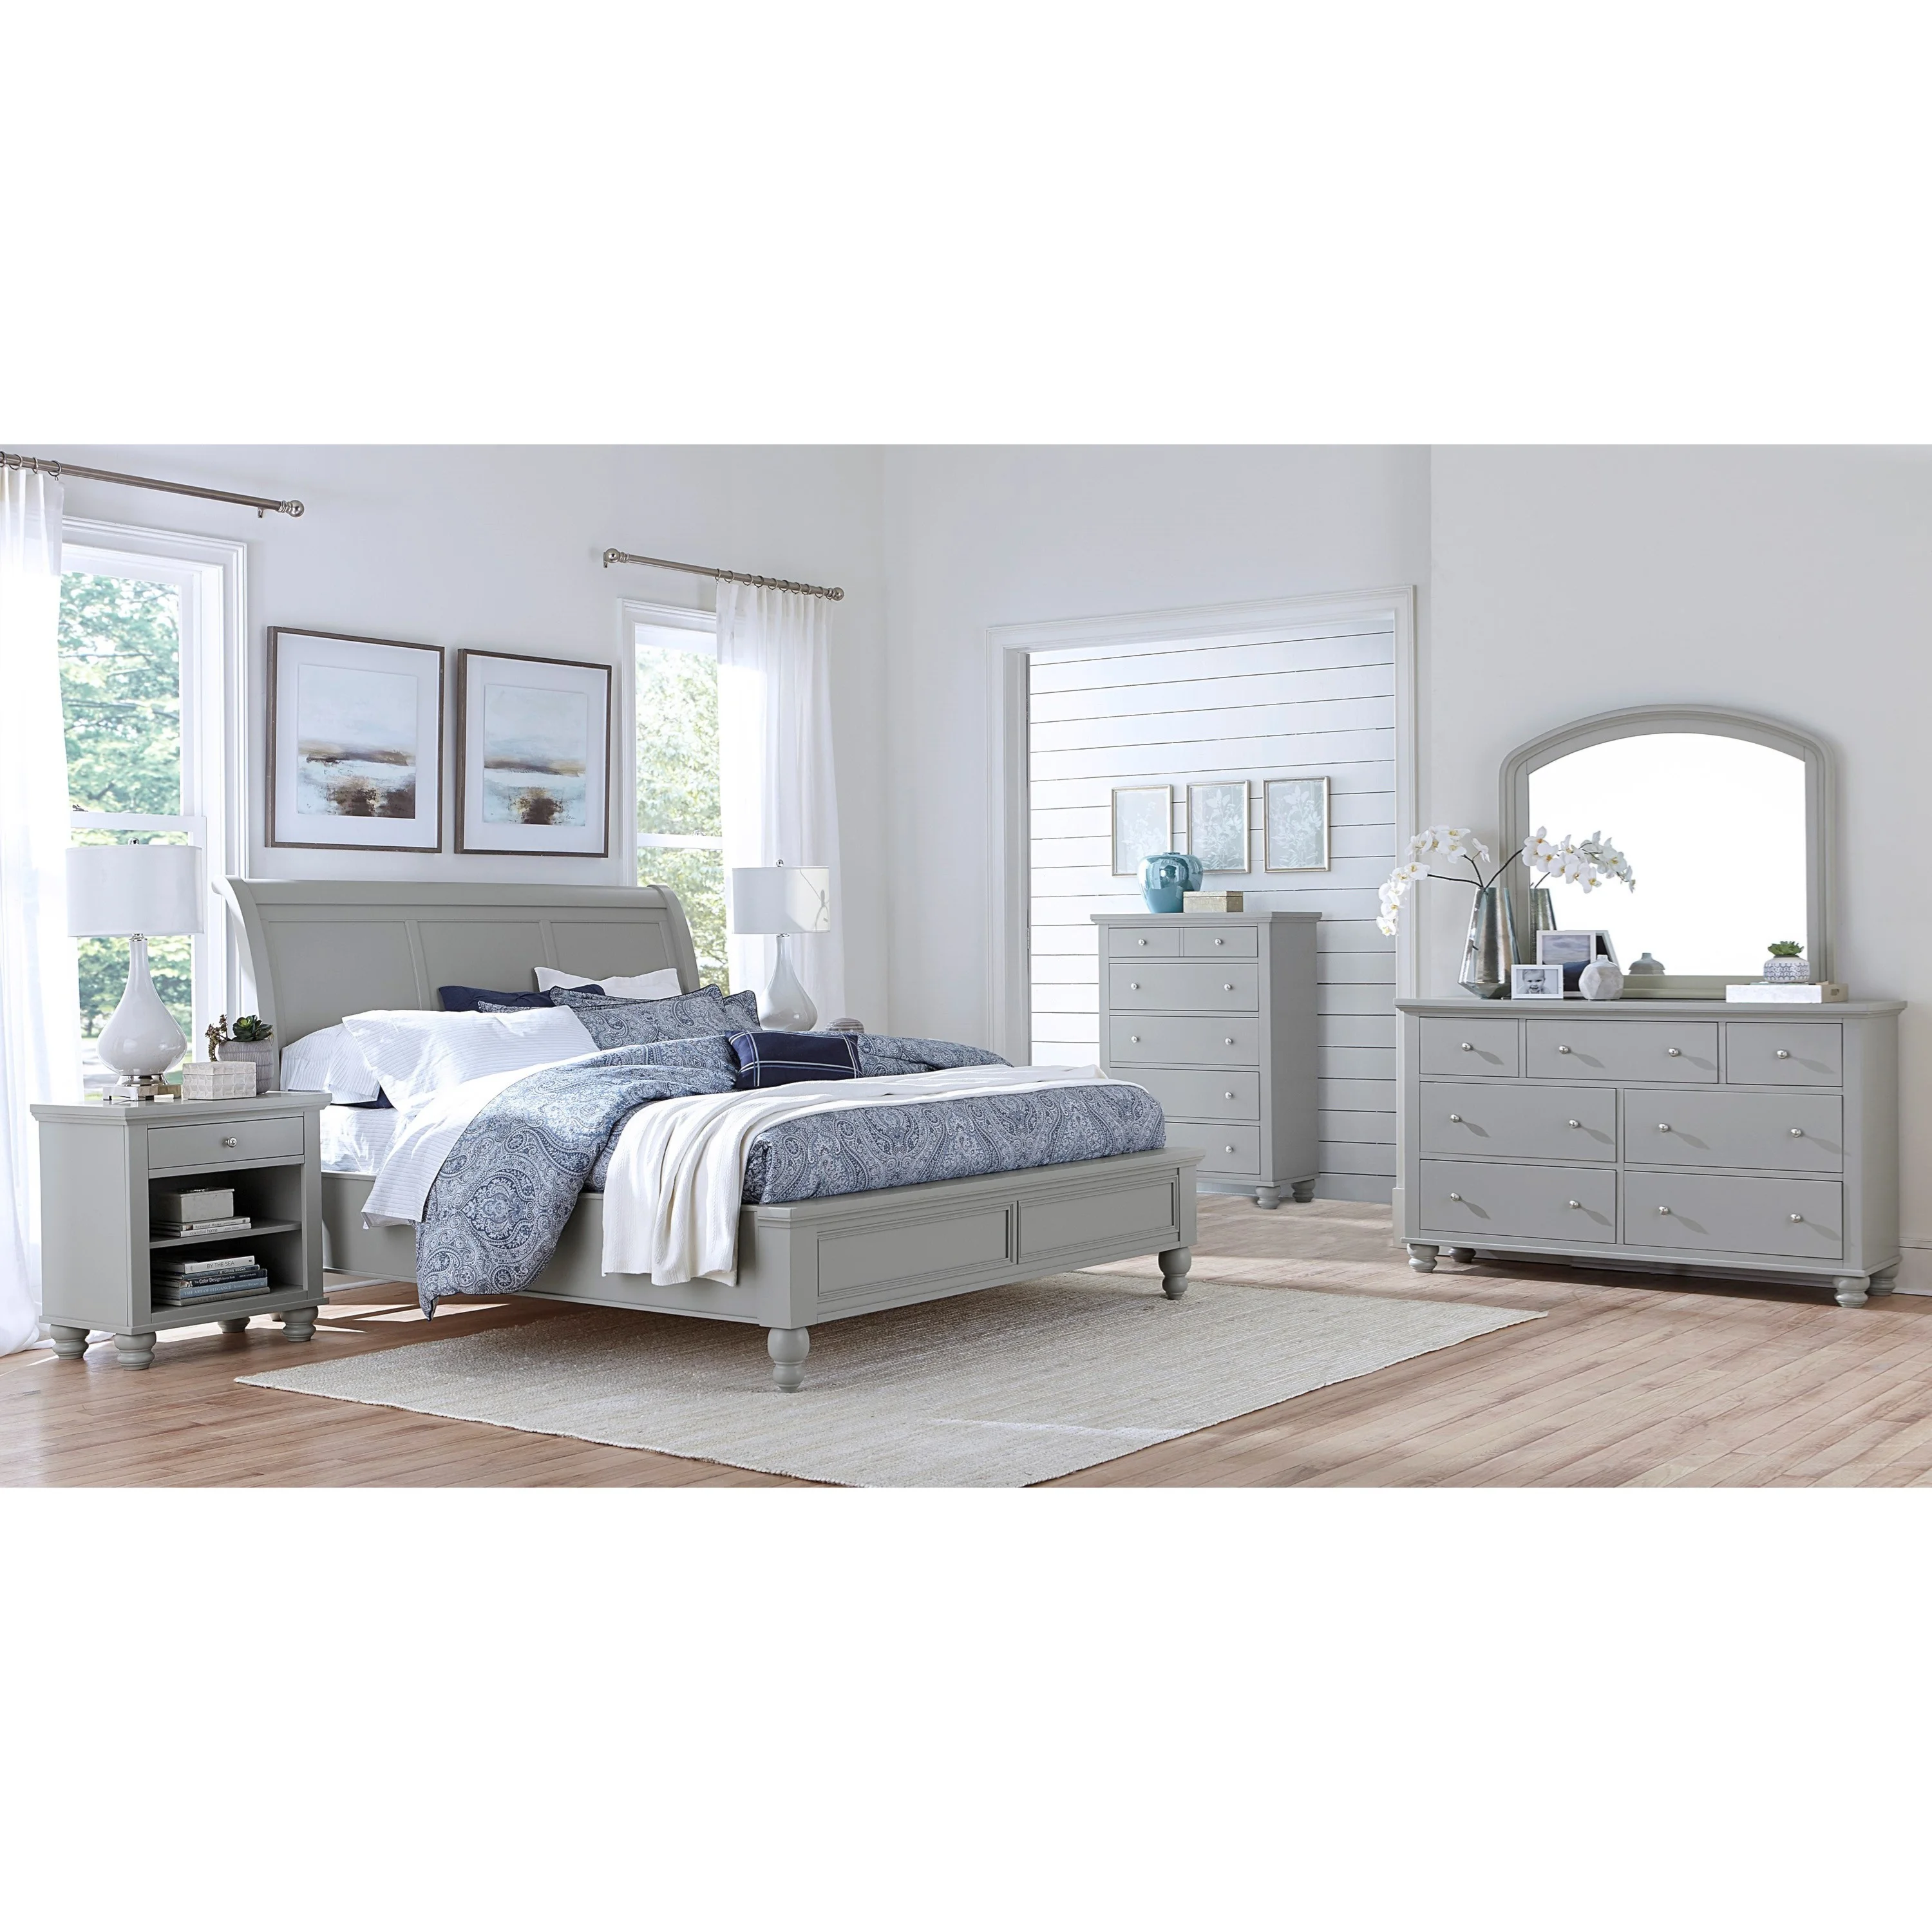 Aspenhome Cambridge CHY CB GRY K Bedroom Group 8 King Bedroom Group ...